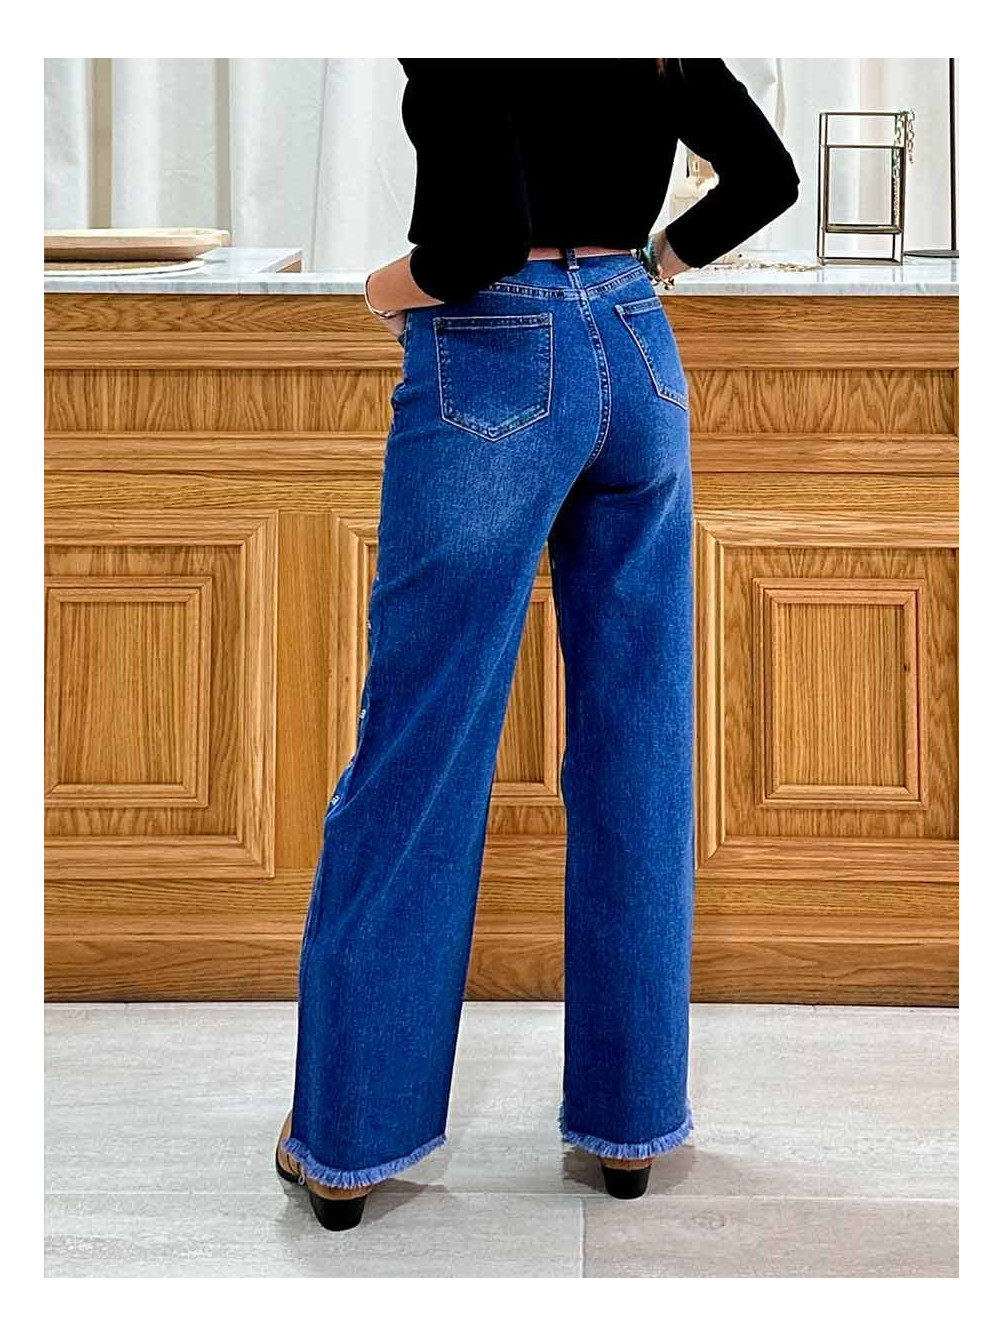 Jeans Strass, Jeans Cropped, Jeans Wide Leg, Mariquita Trasquilá